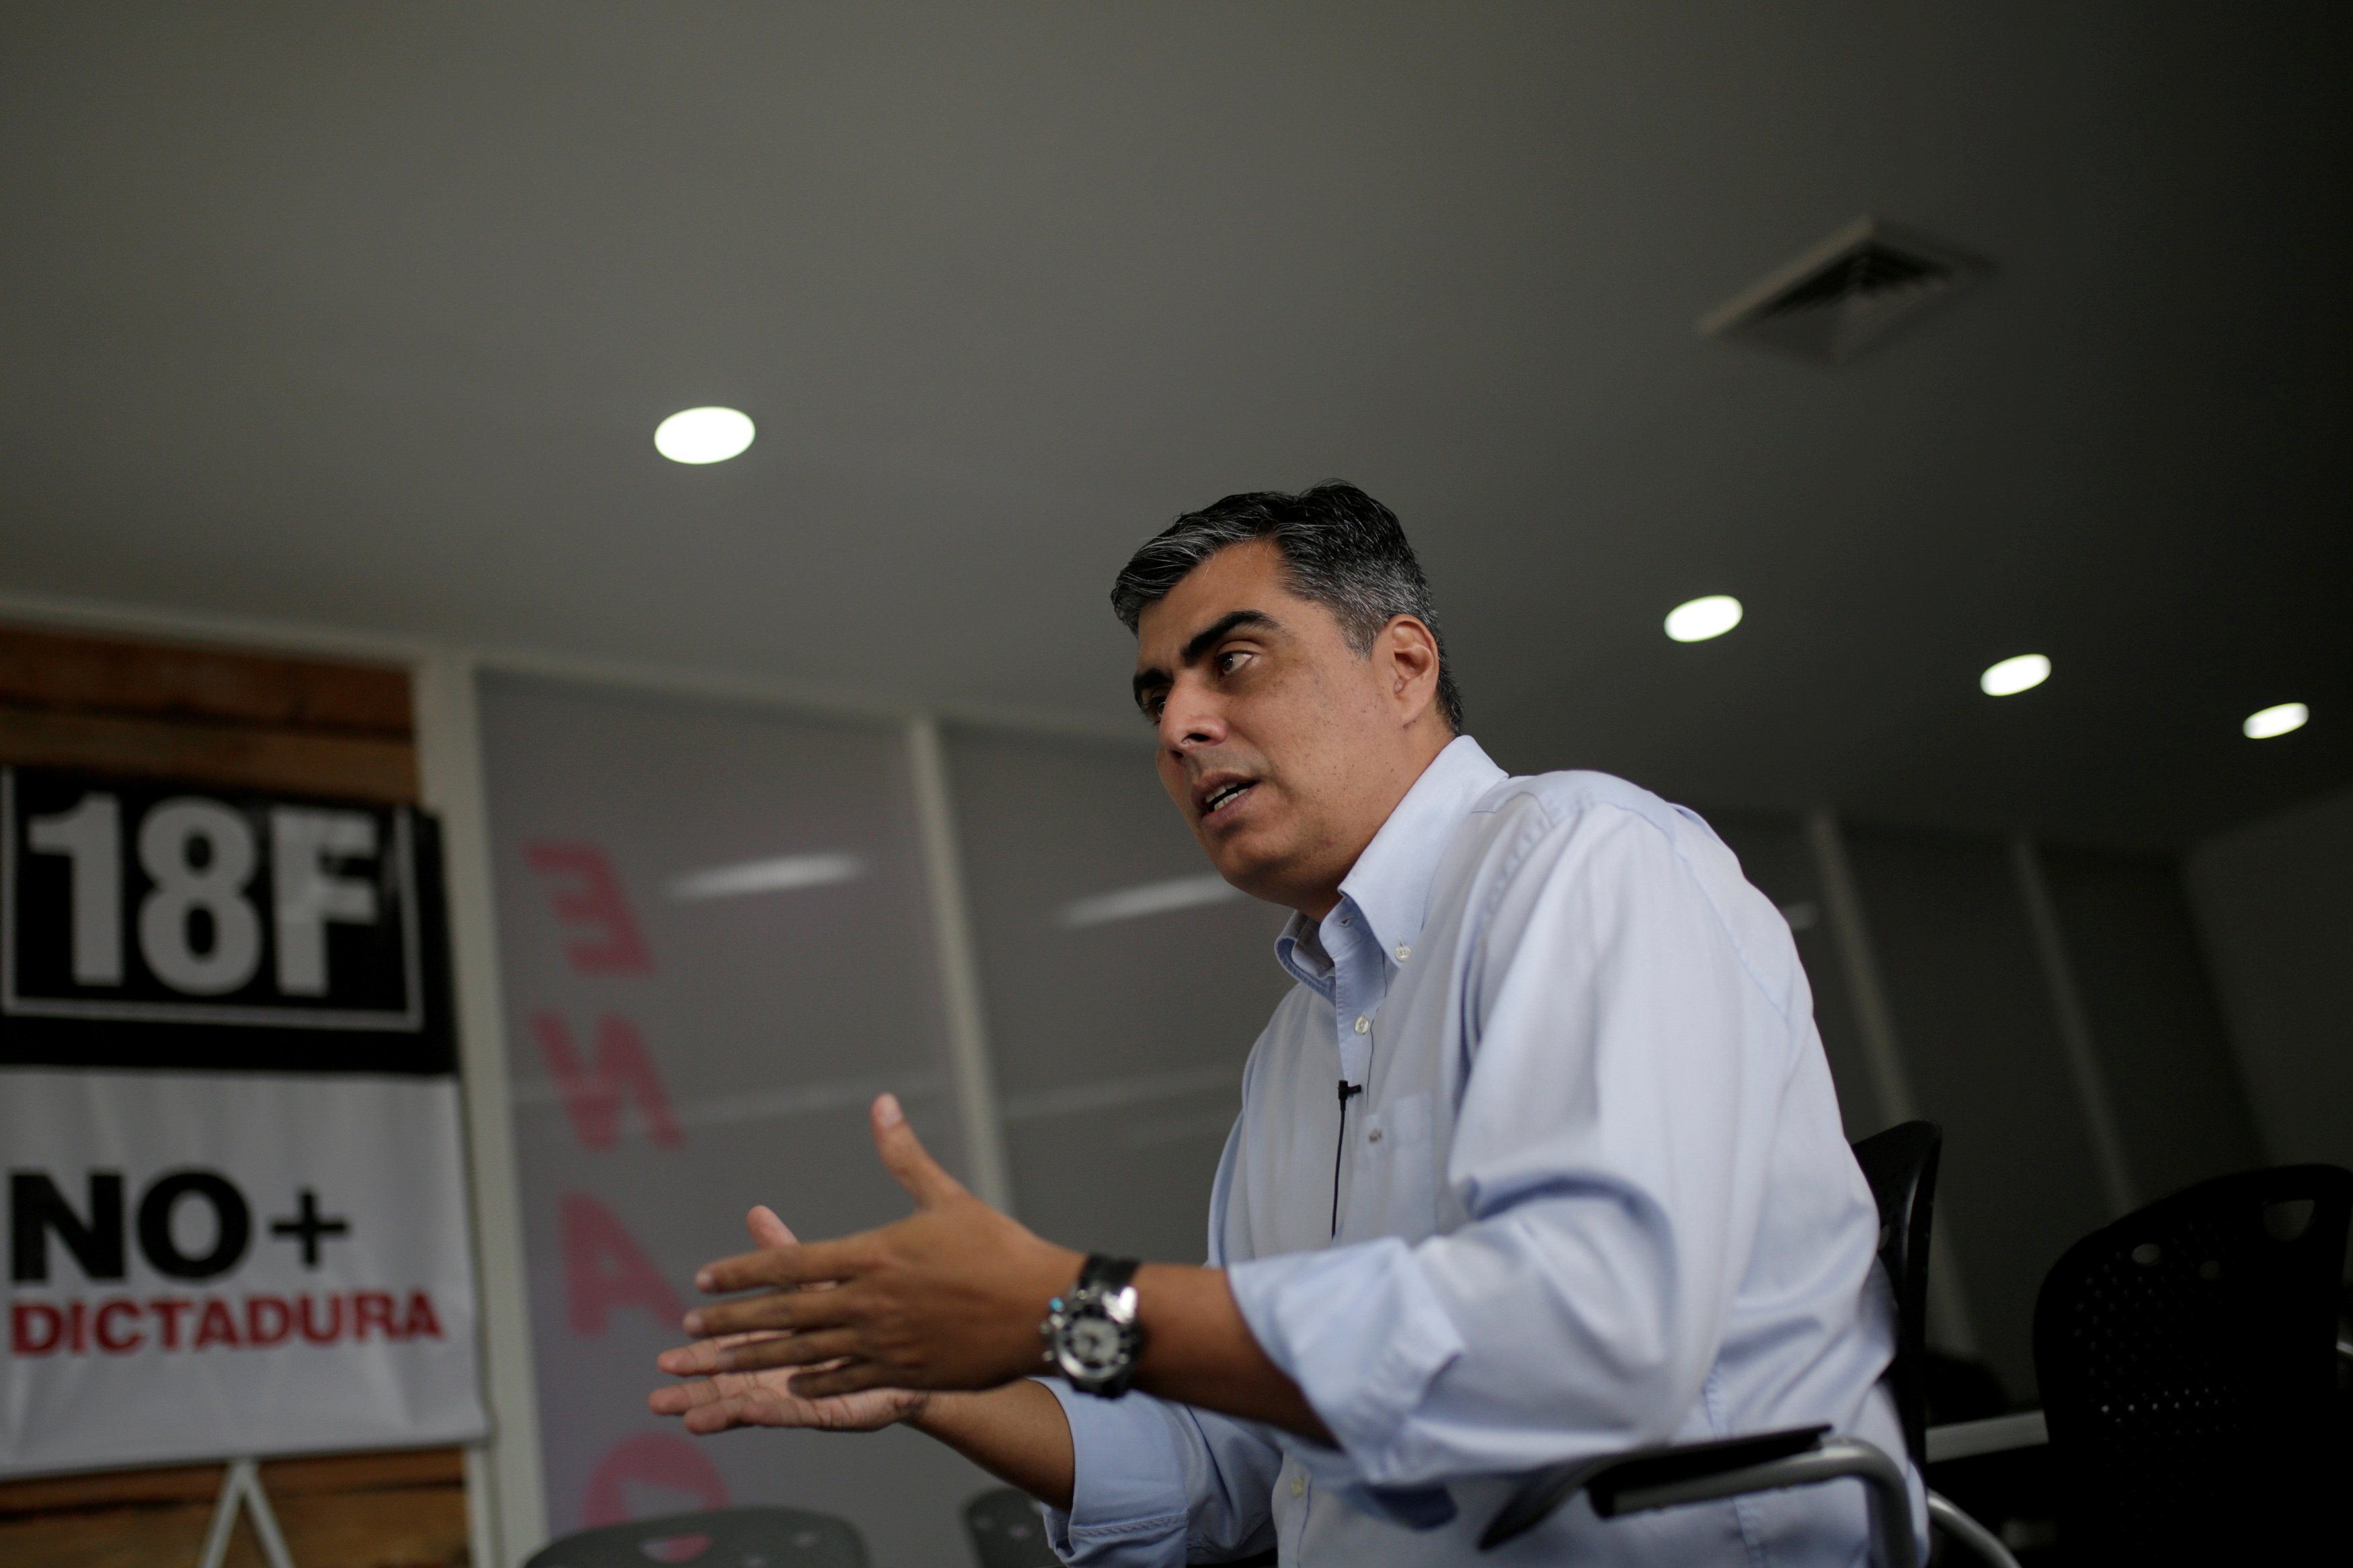 Emilio Grateron, national head of activism of Popular Will (Voluntad Popular) party,  speaks during an interview with Reuters in Caracas